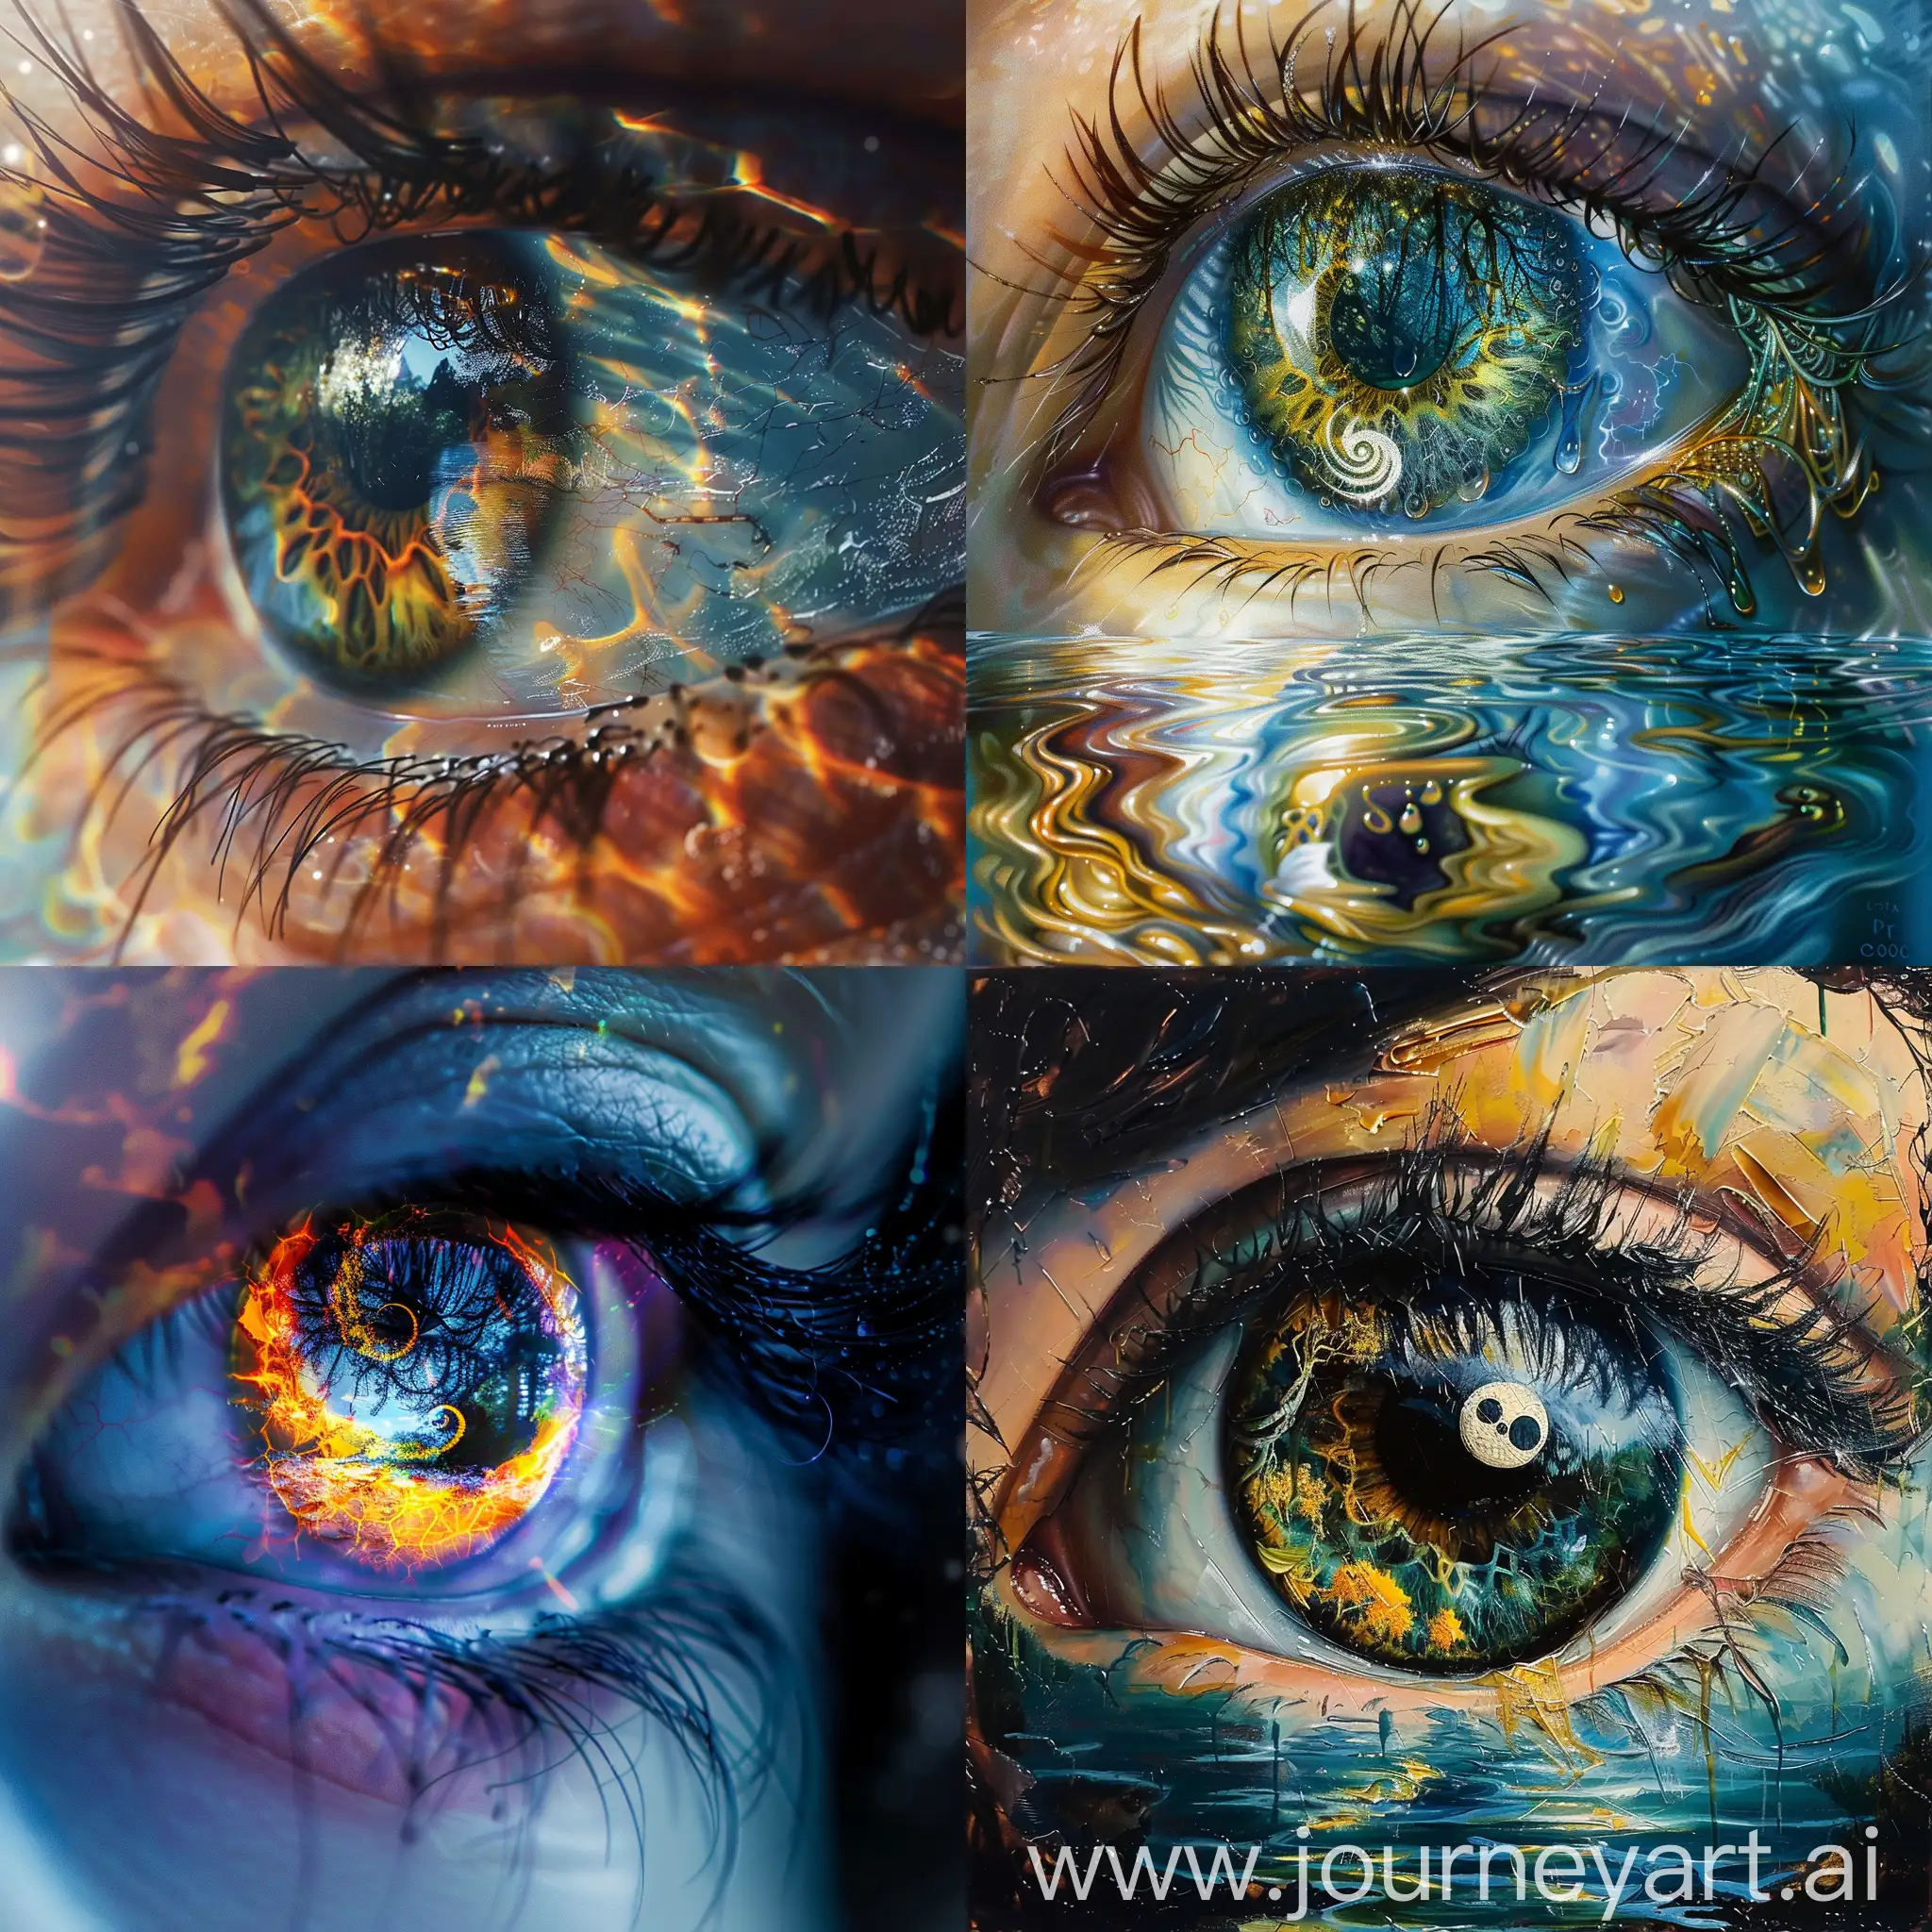 Hyperrealistic-Yin-Yang-Eye-with-Ethereal-Reflections-and-Abstract-Patterns